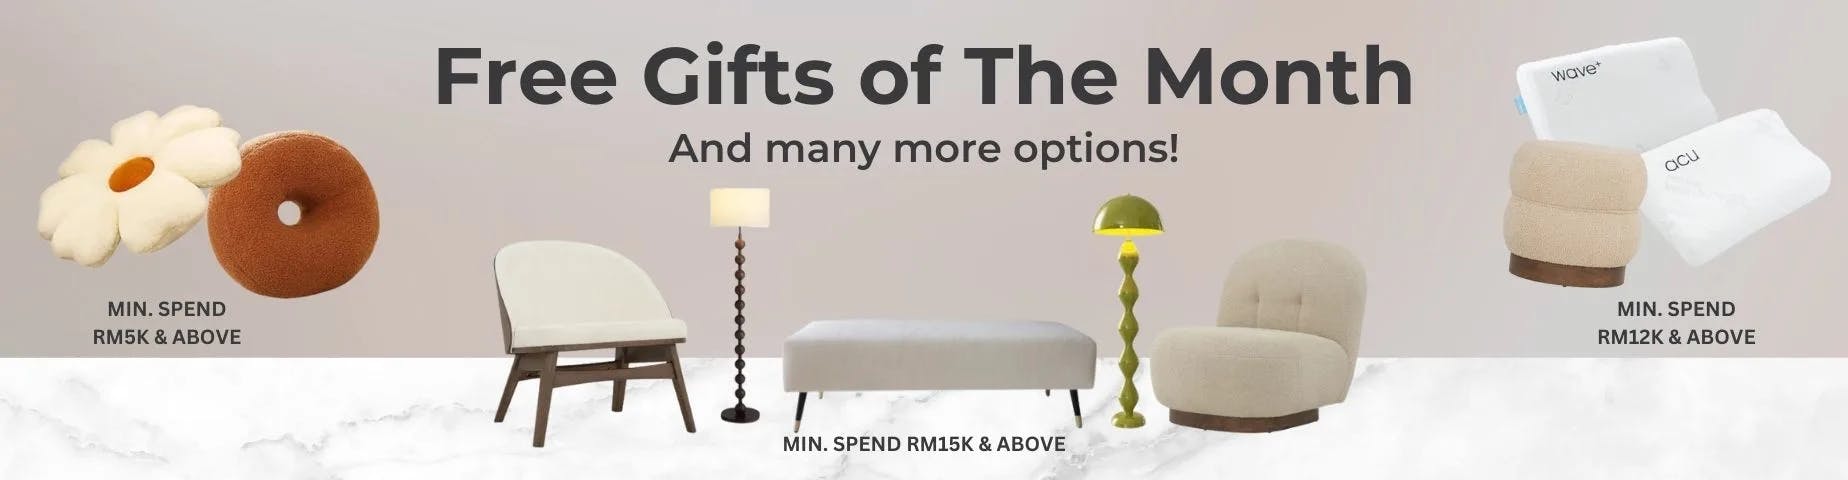 FREE Gifts of The Month for 15k & Above